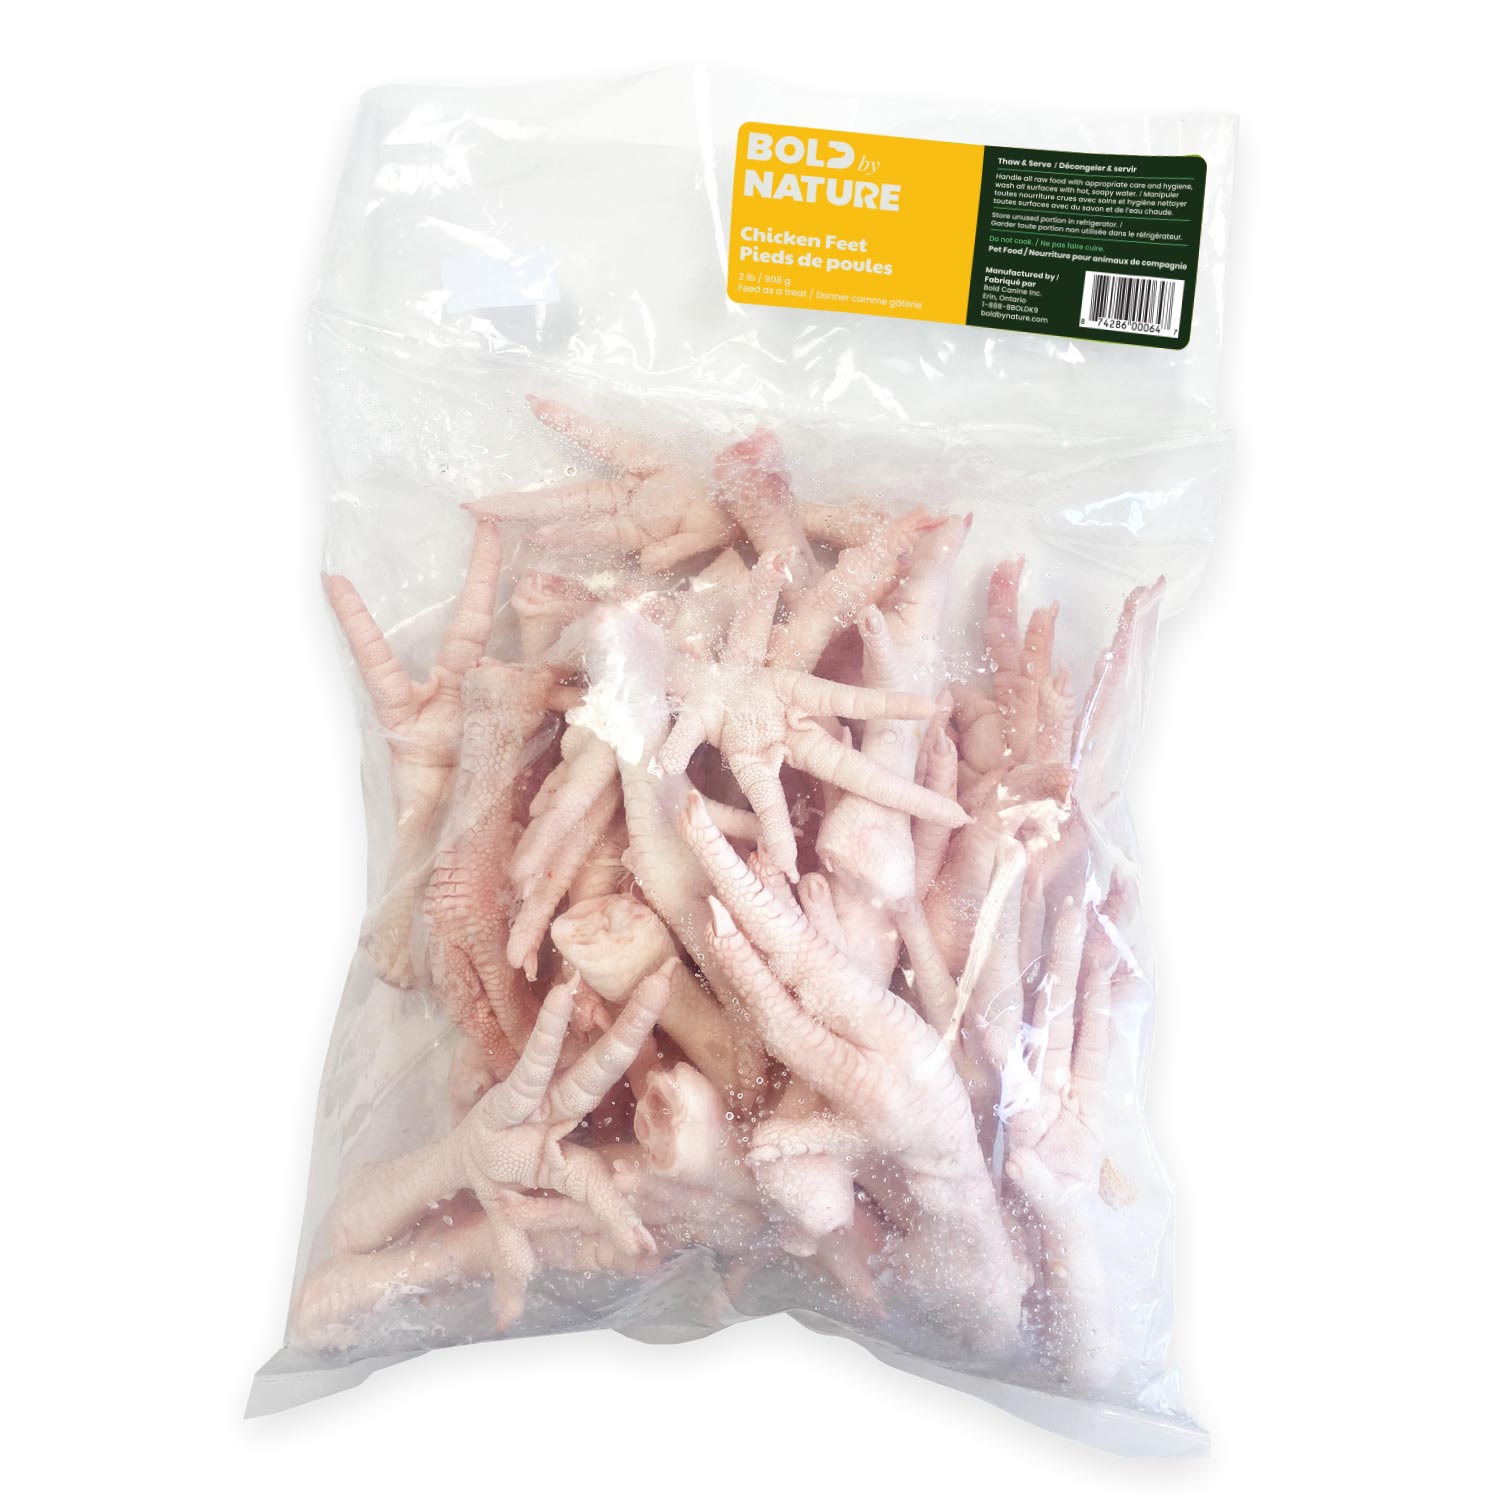 Bold by Nature - Chicken Feet - Frozen Product